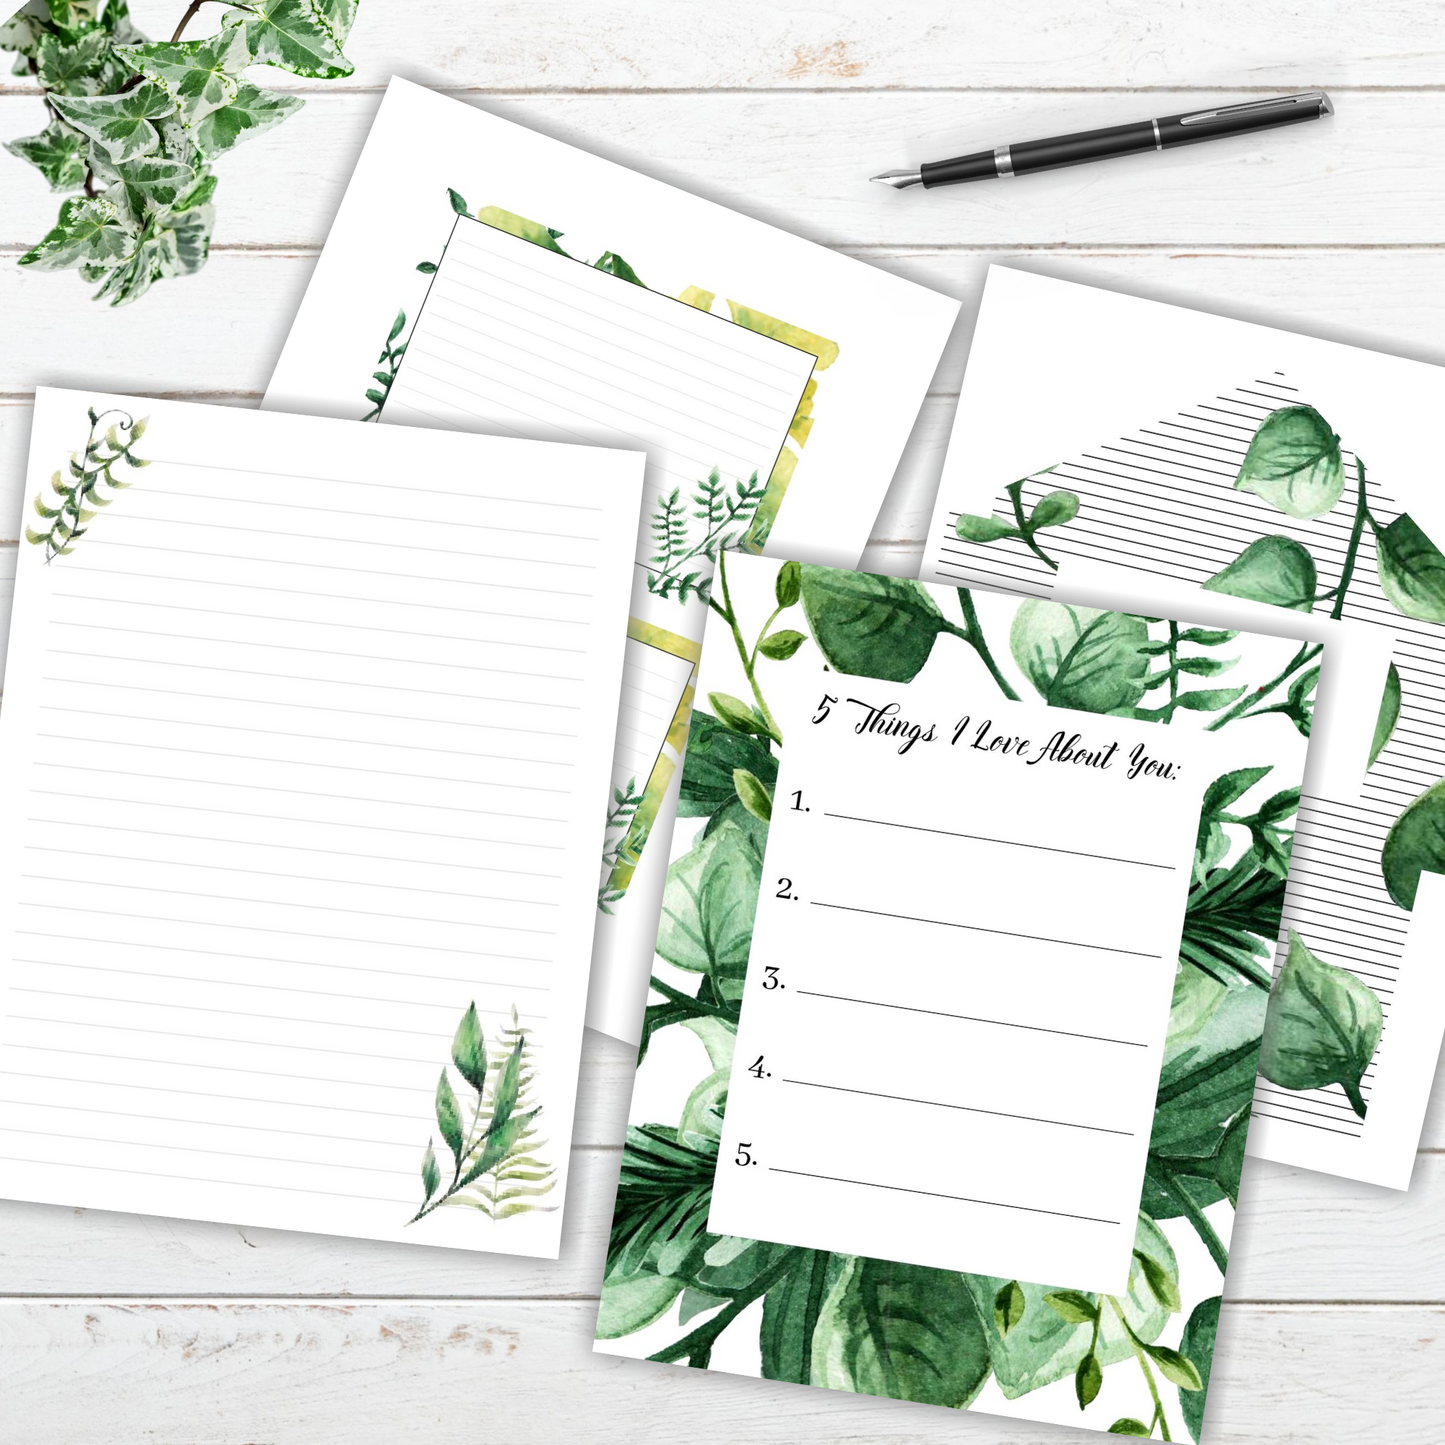 Printable 5 Things I Love About You Stationery